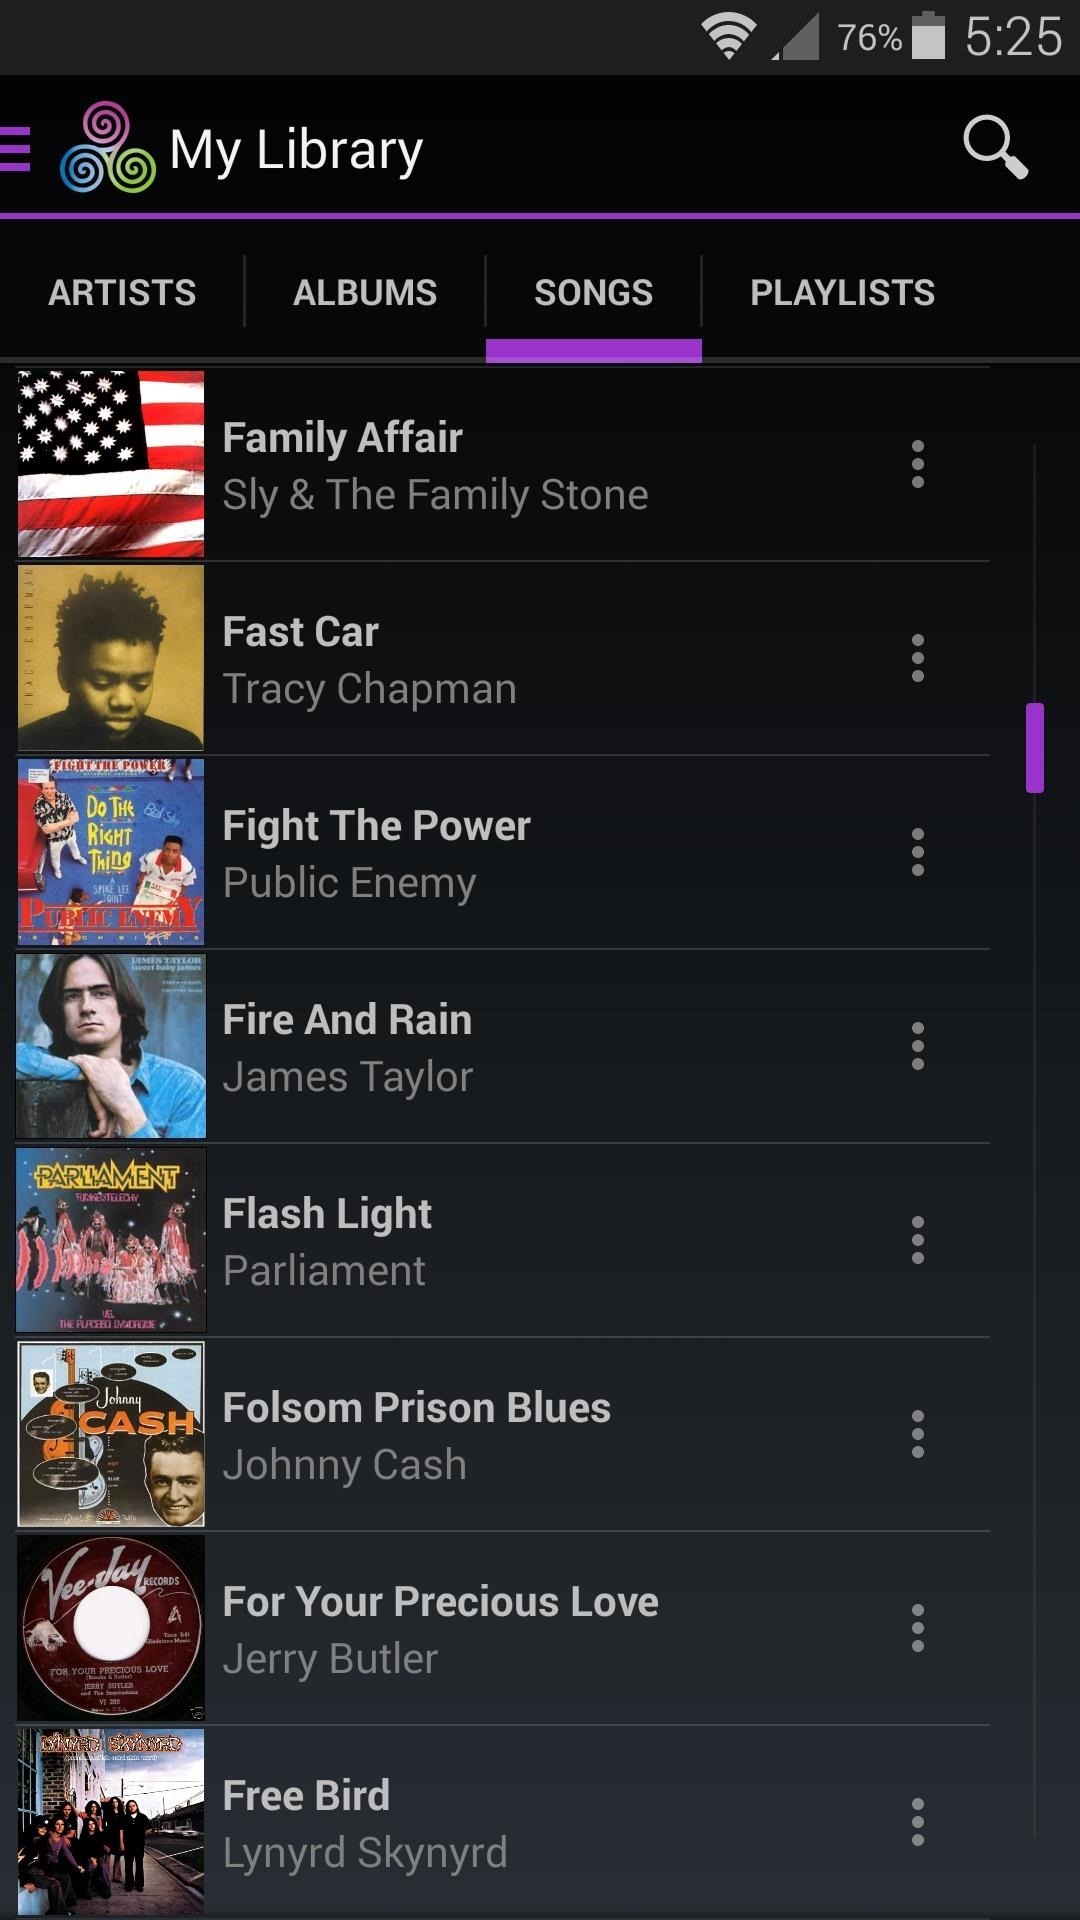 How to Share Your Android's Music Library with All of Your Friends